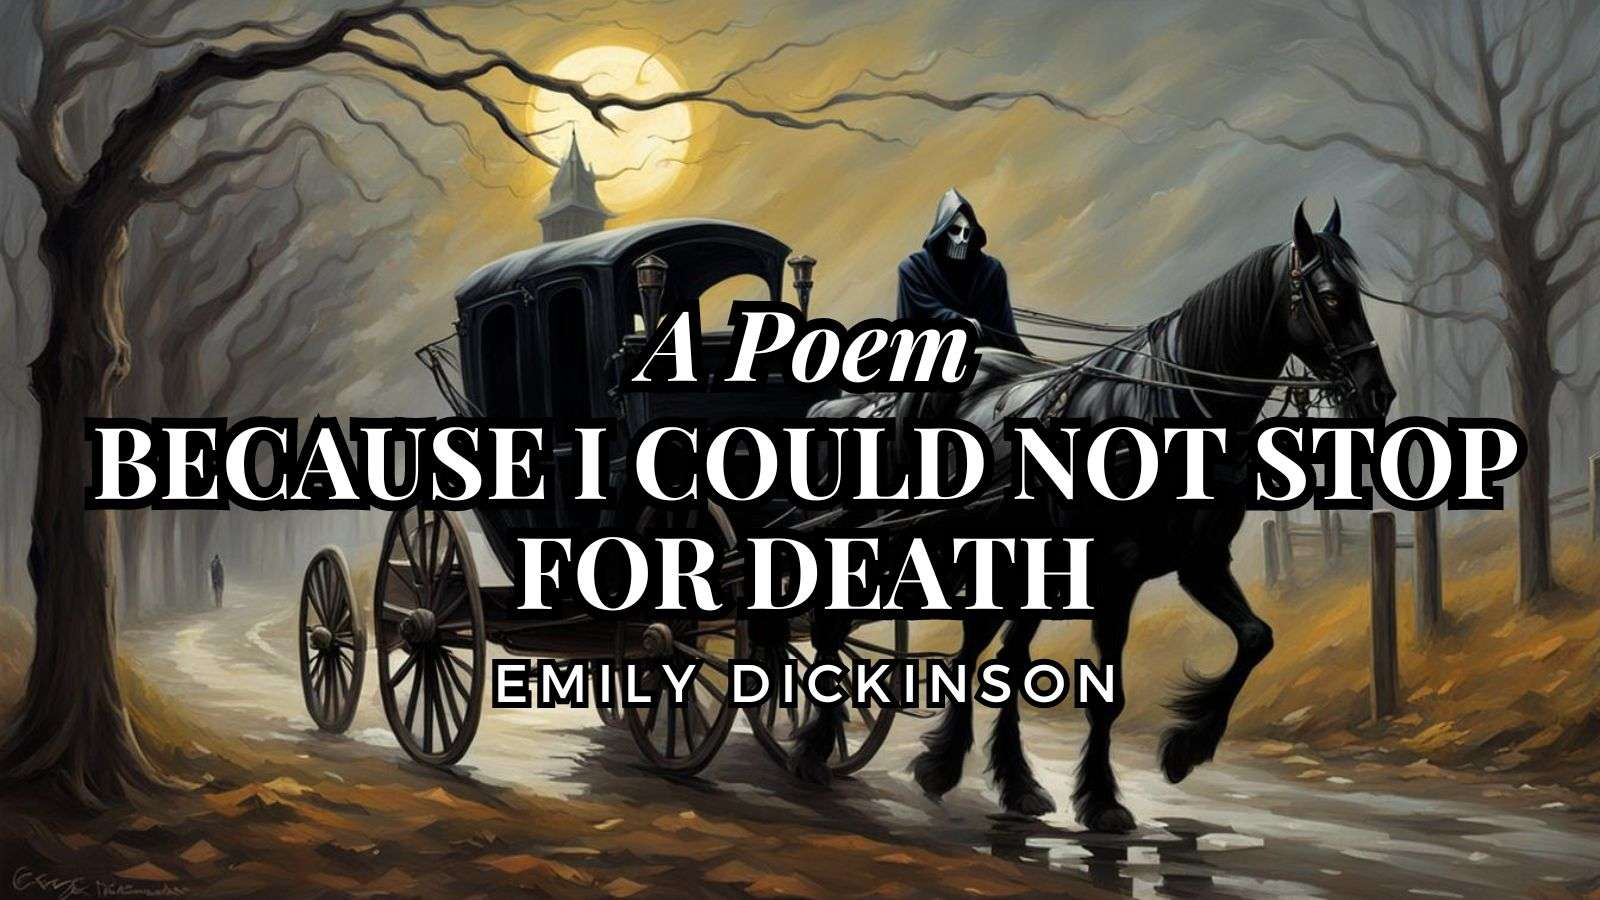 Because I could not stop for Death by Emily Dickinson